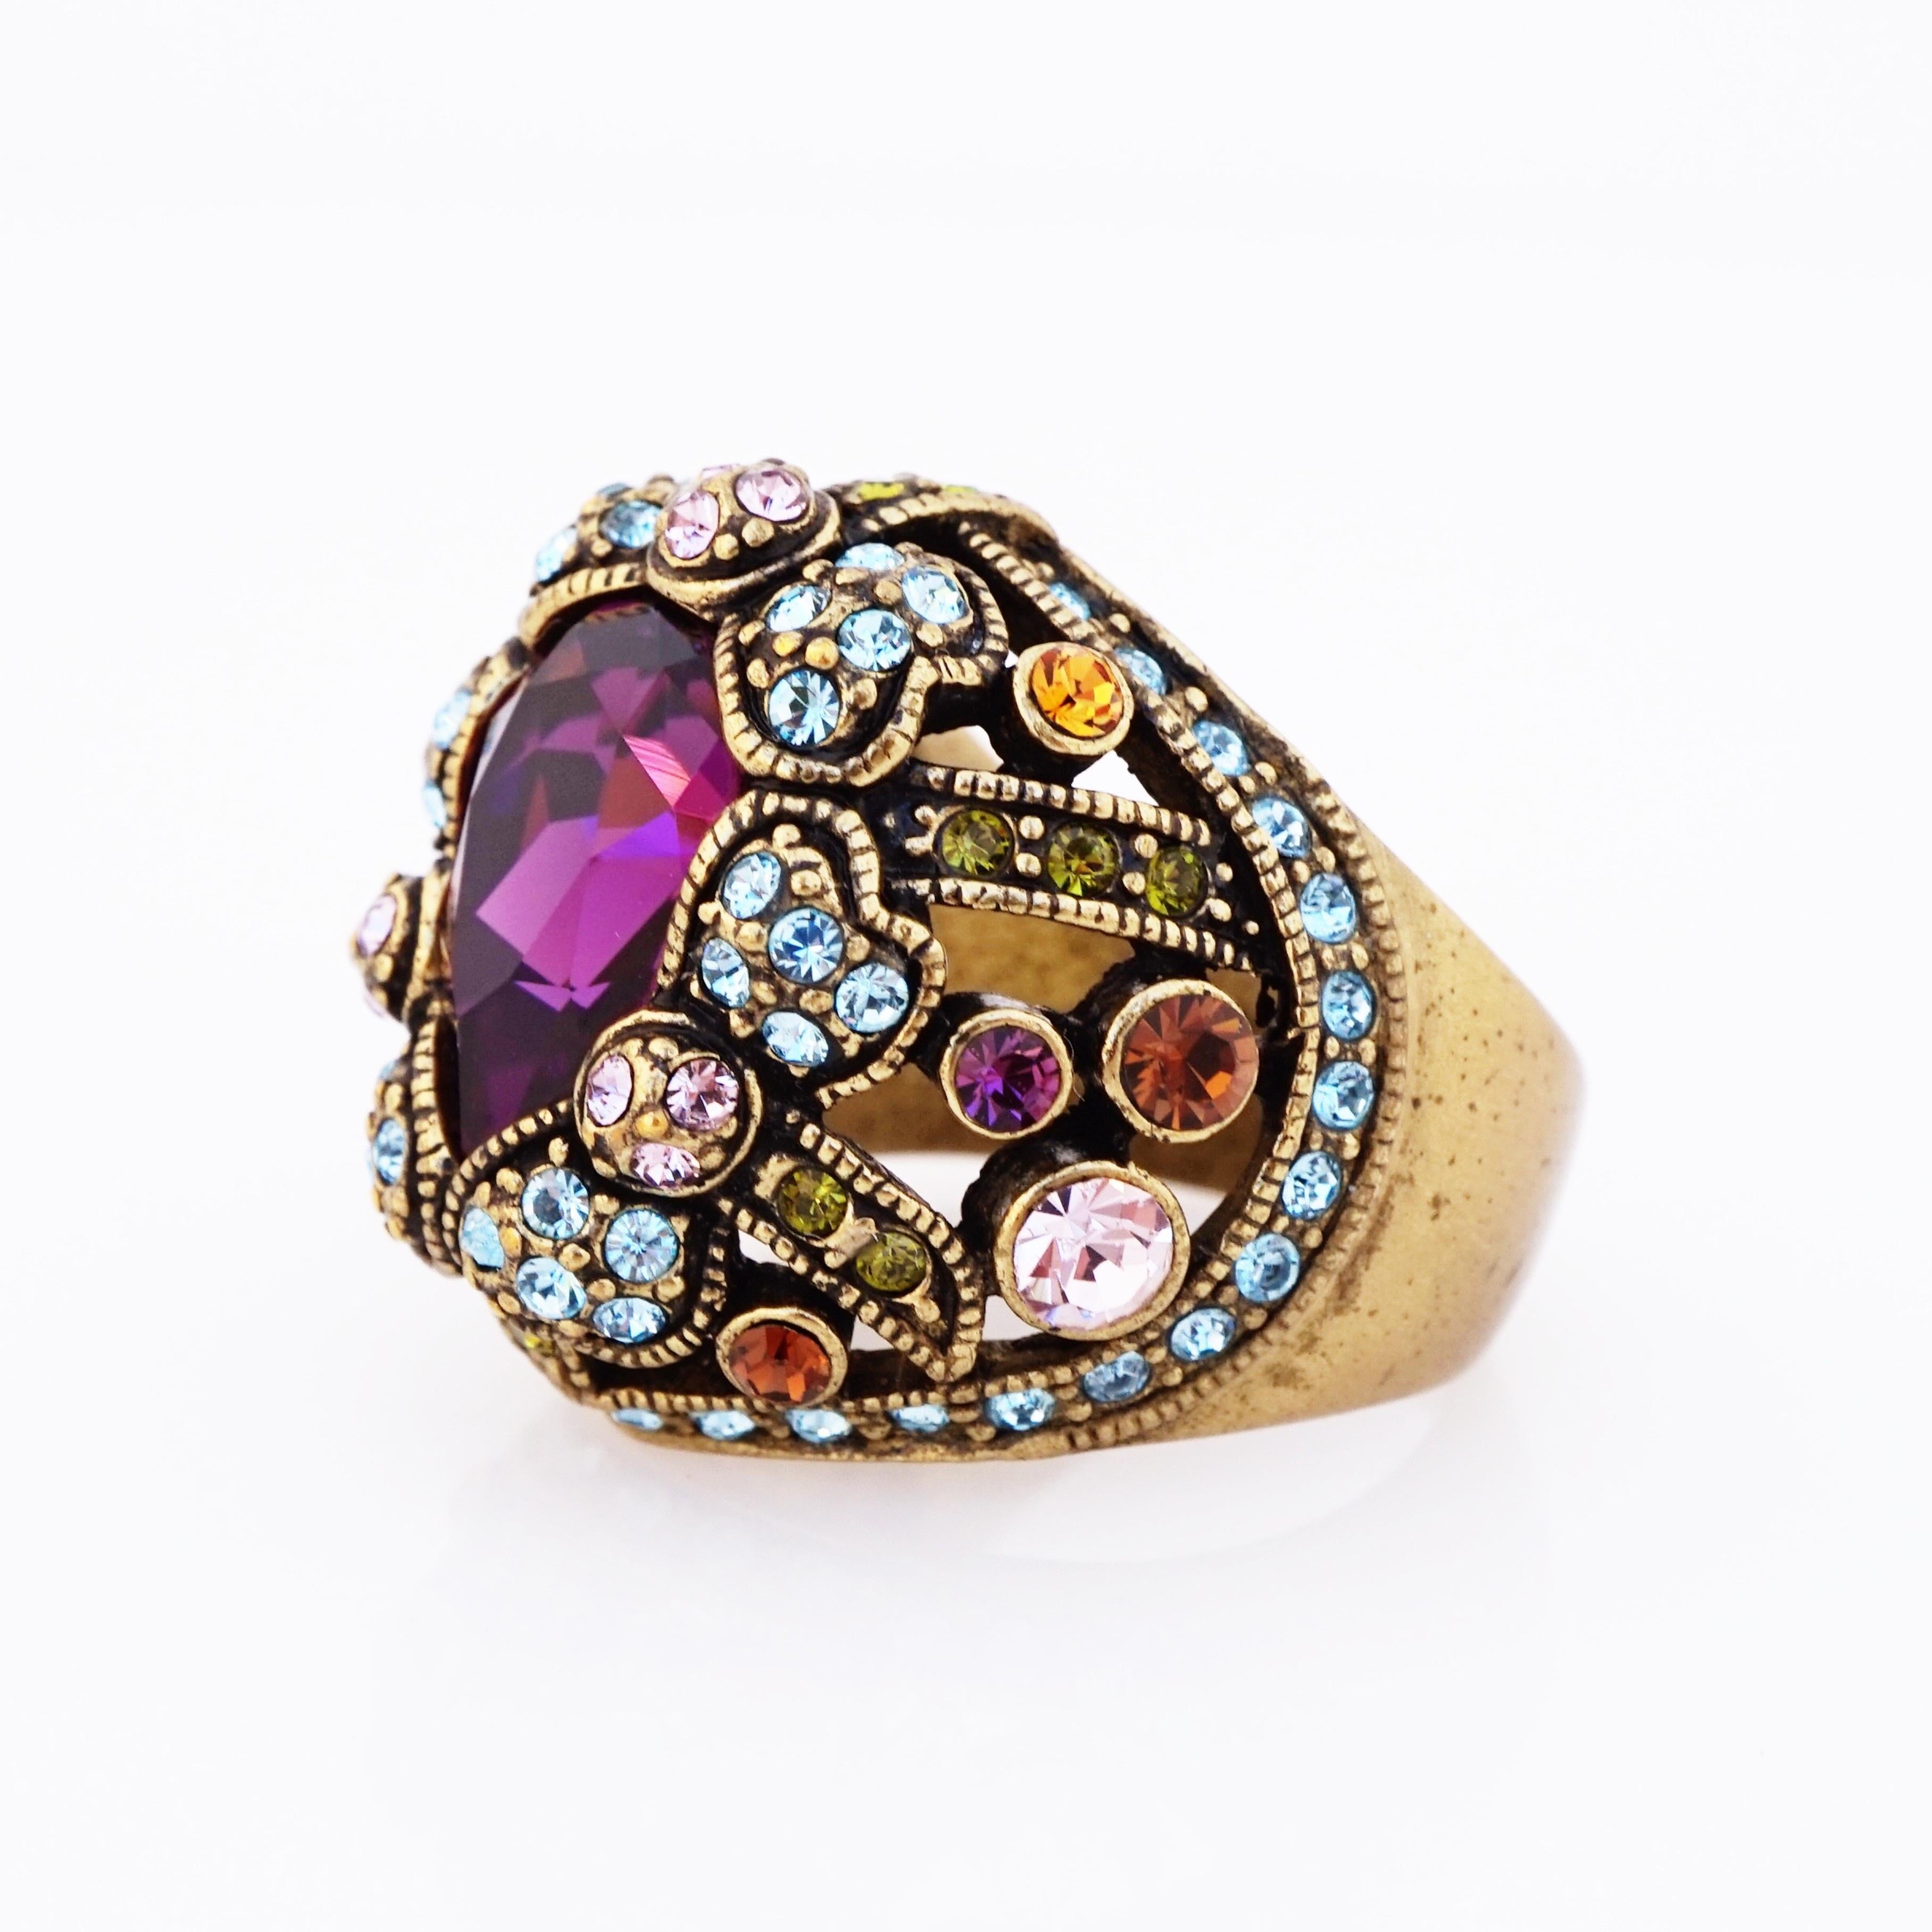 - Vintage item

- Collectible costume jewelry piece from the '90s

- Ring size 9.5 (US)

- Antique gold tone

- One large Amethyst-purple colored Swarovski crystal surrounded by multi-colored Swarovski crystal accents

- By Heidi Daus (signed on